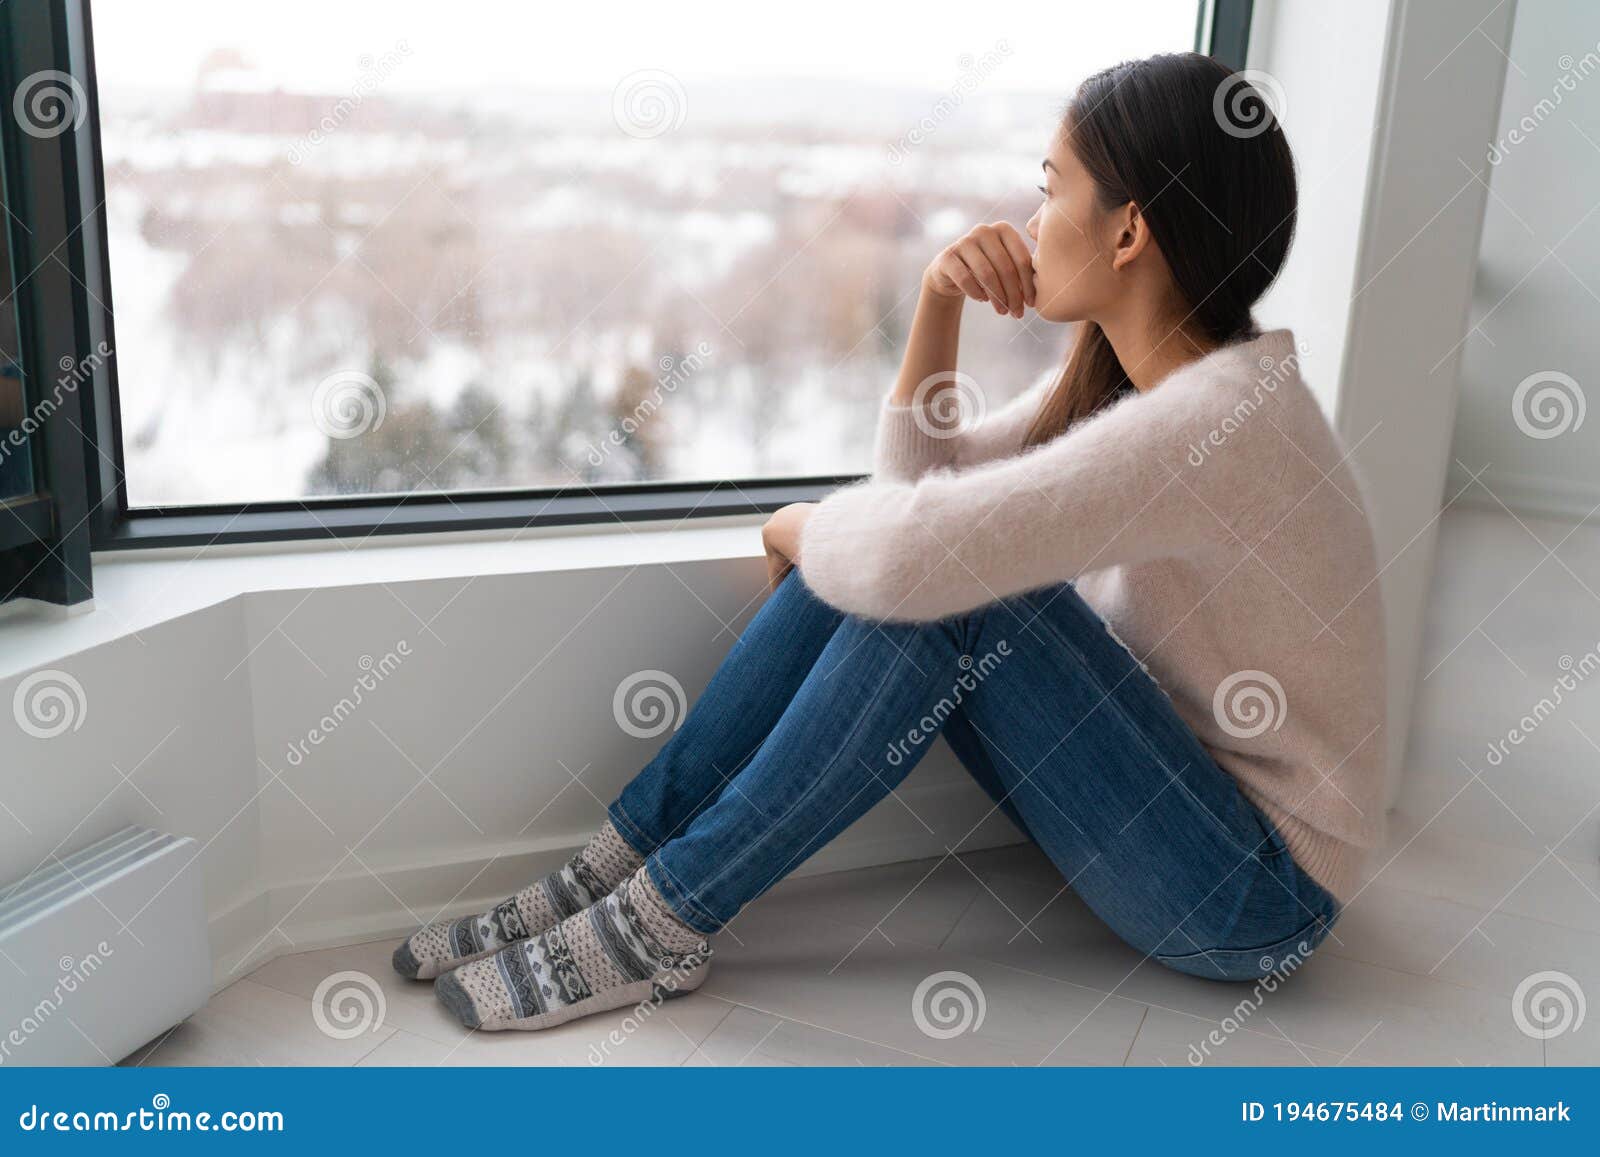 Depressed Young Girl Feeling Sad an Lonely, Anxious Looking Out ...